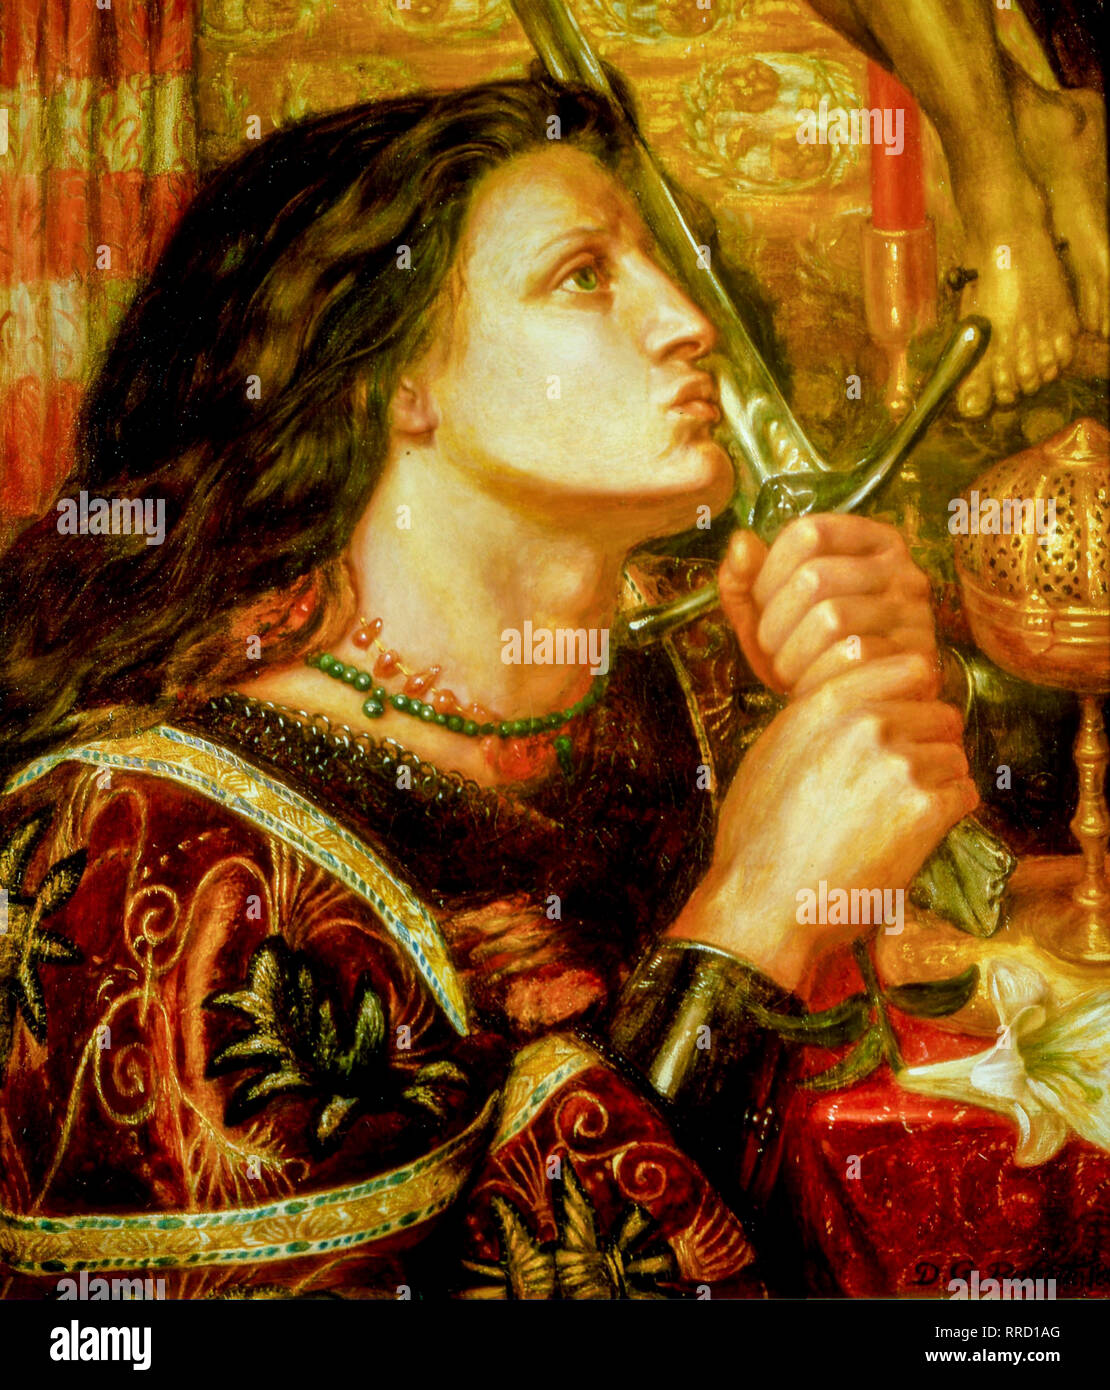 Joan of Arc kissing the Sword of Deliverance, Dante Gabriel Rossetti, 1863, portrait painting Stock Photo